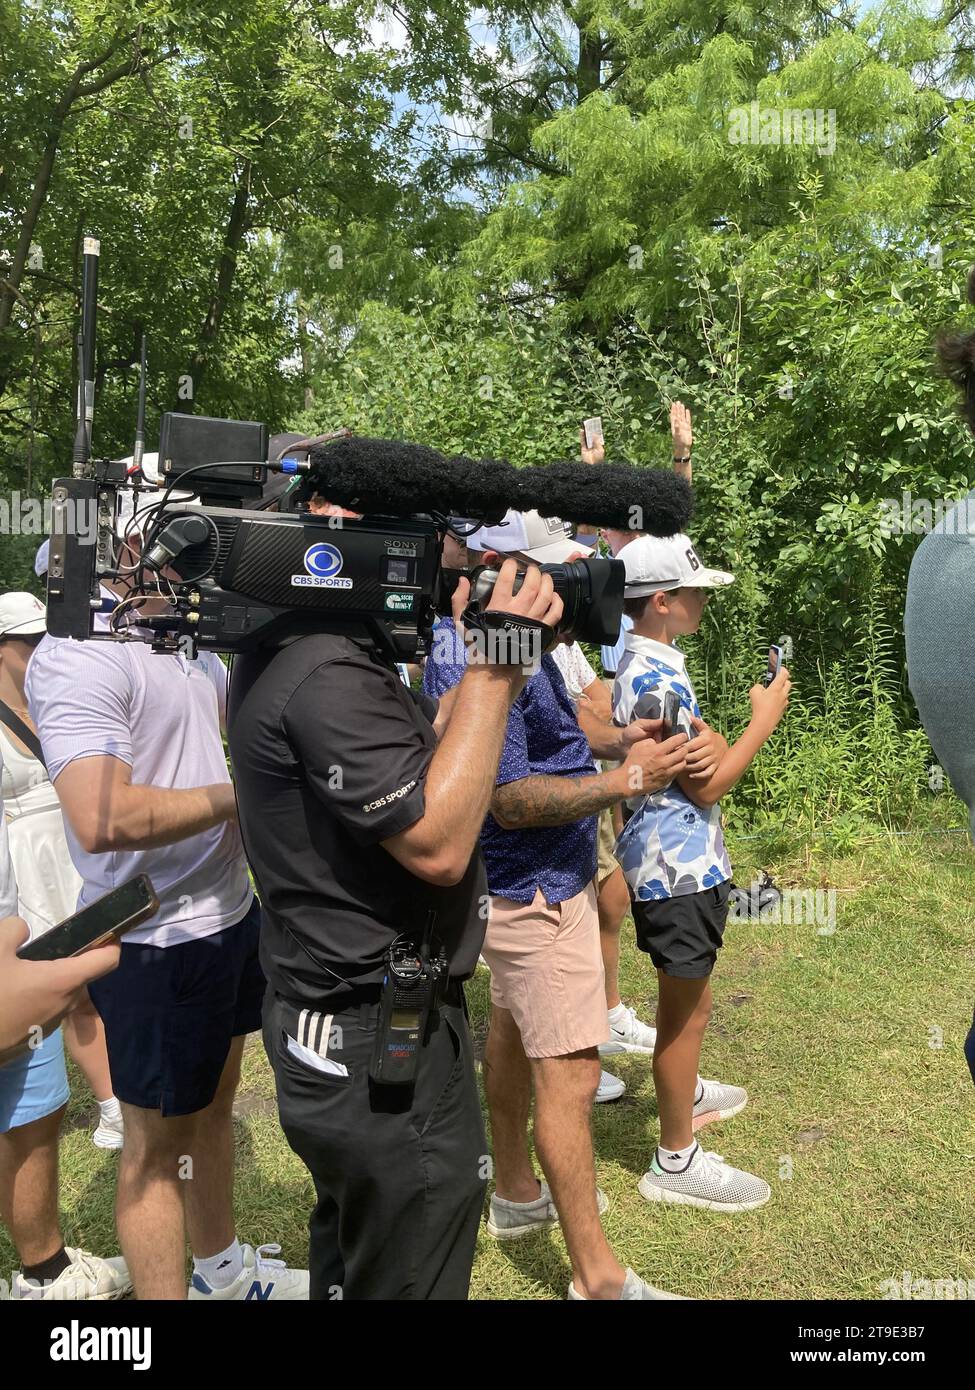 shoulder mounted TV camera at golfing event Stock Photo